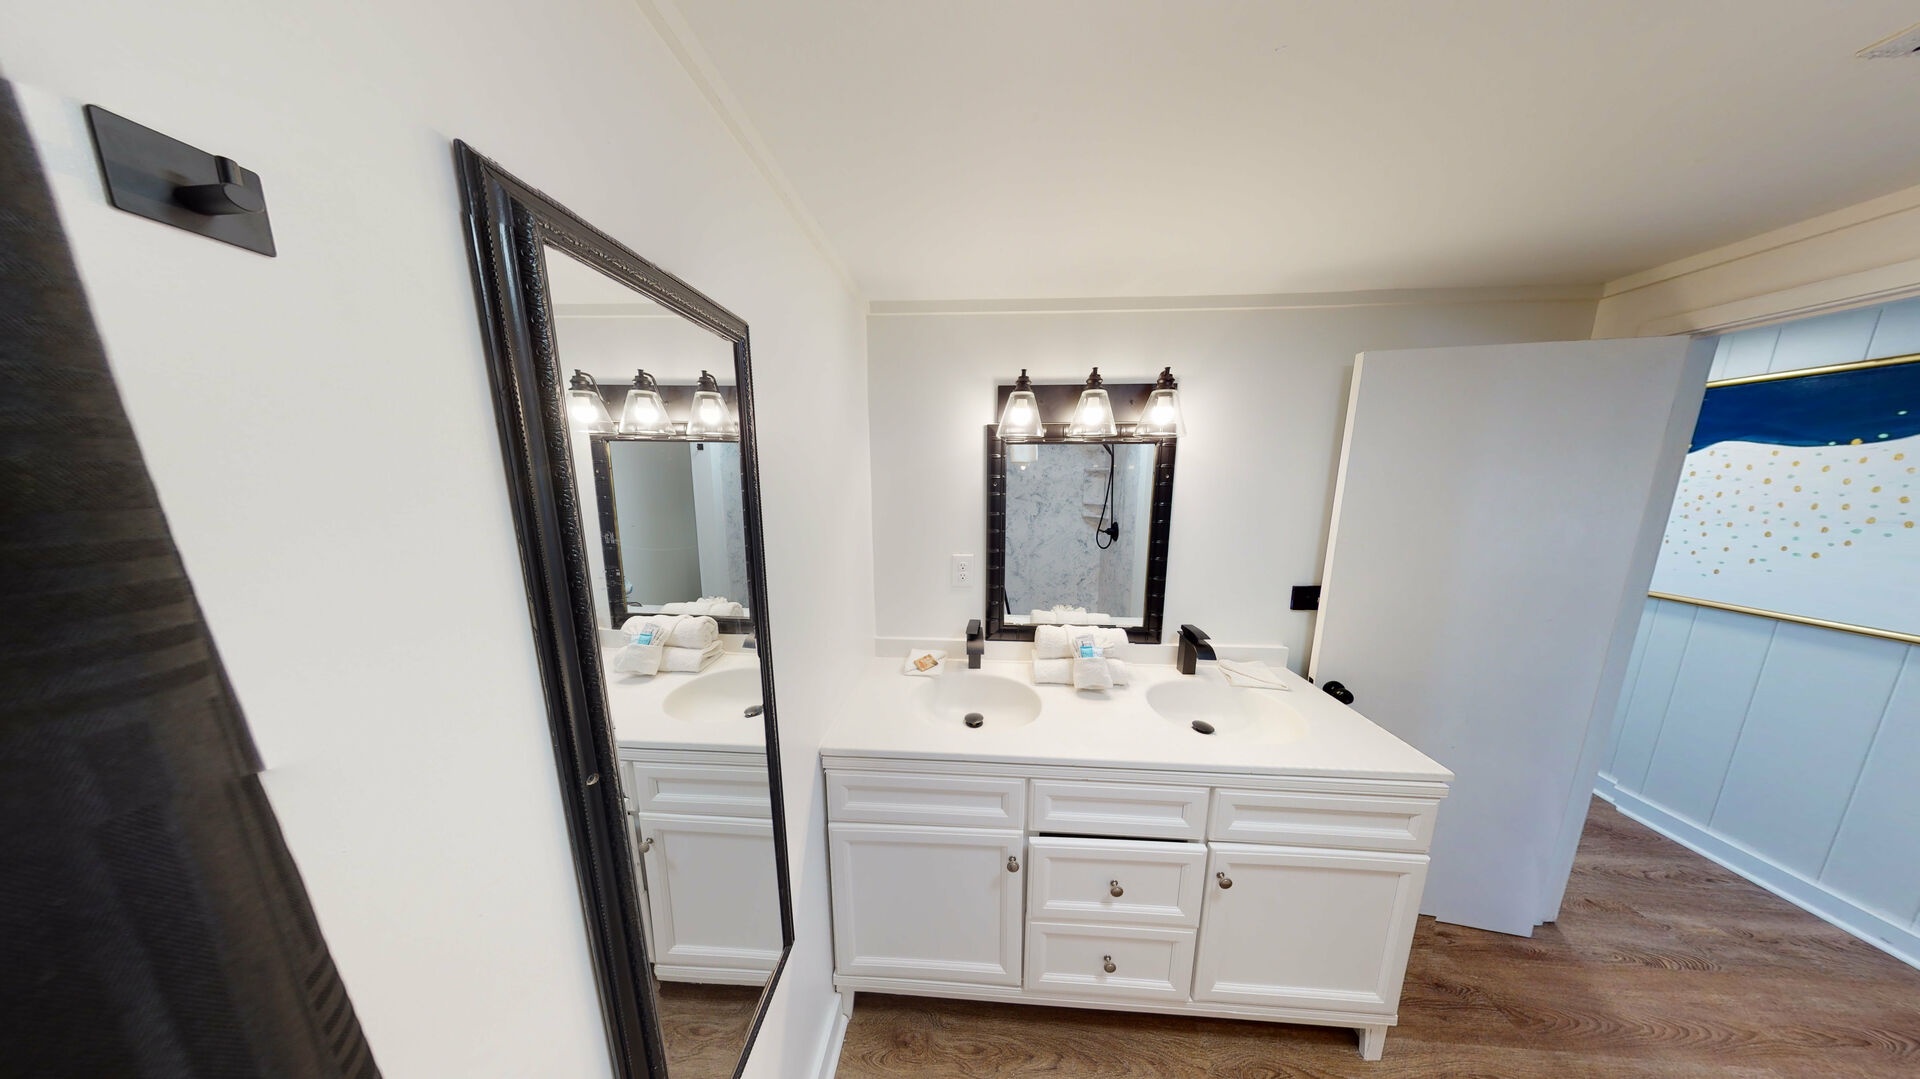 Shared hall bath with walk-in shower and double vanity